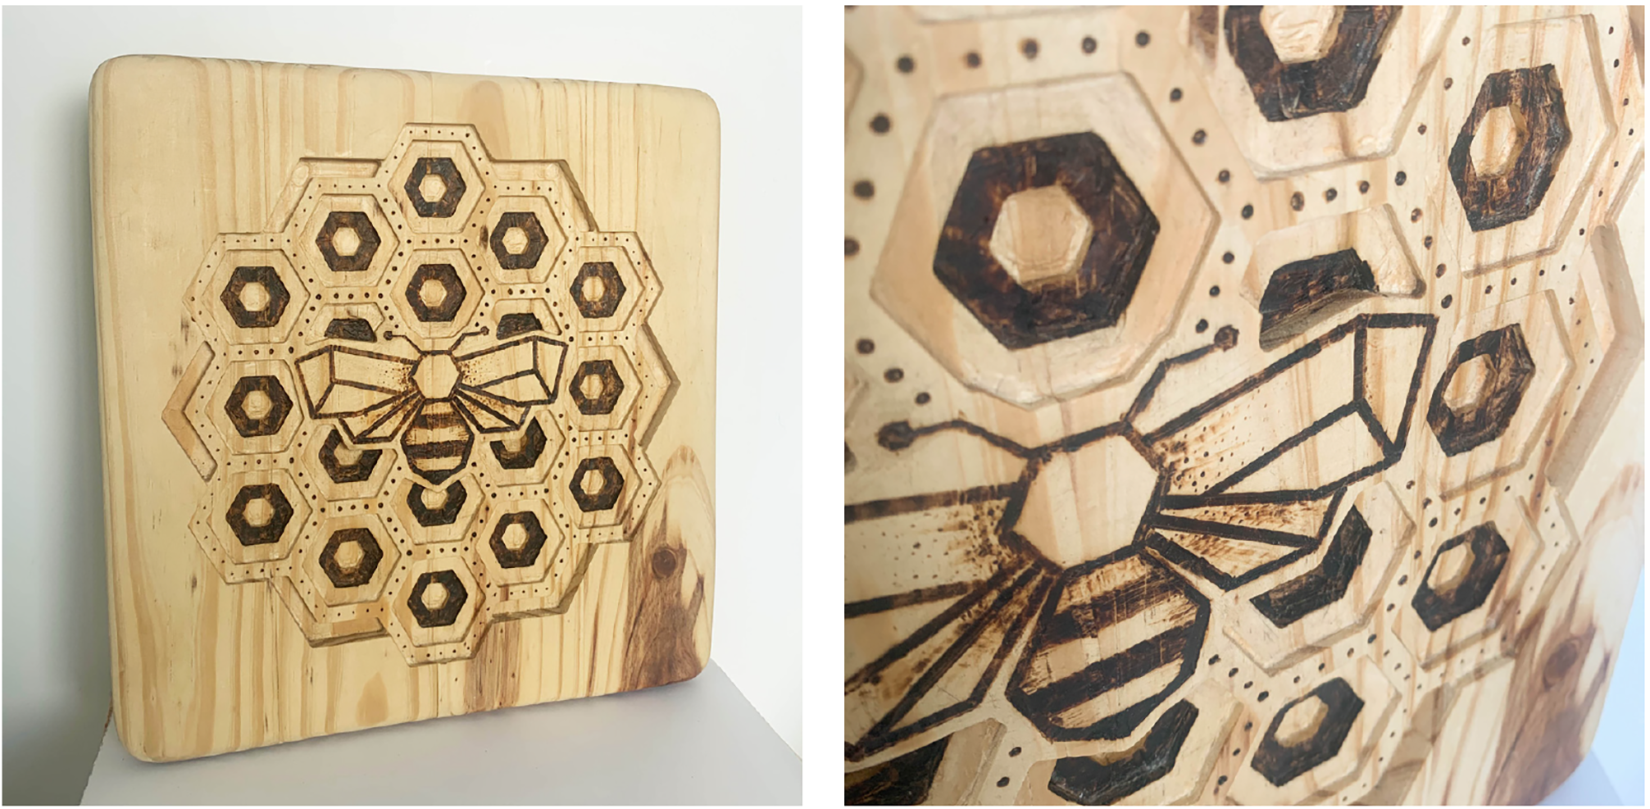 Honeybee design carved into a wooden plaque